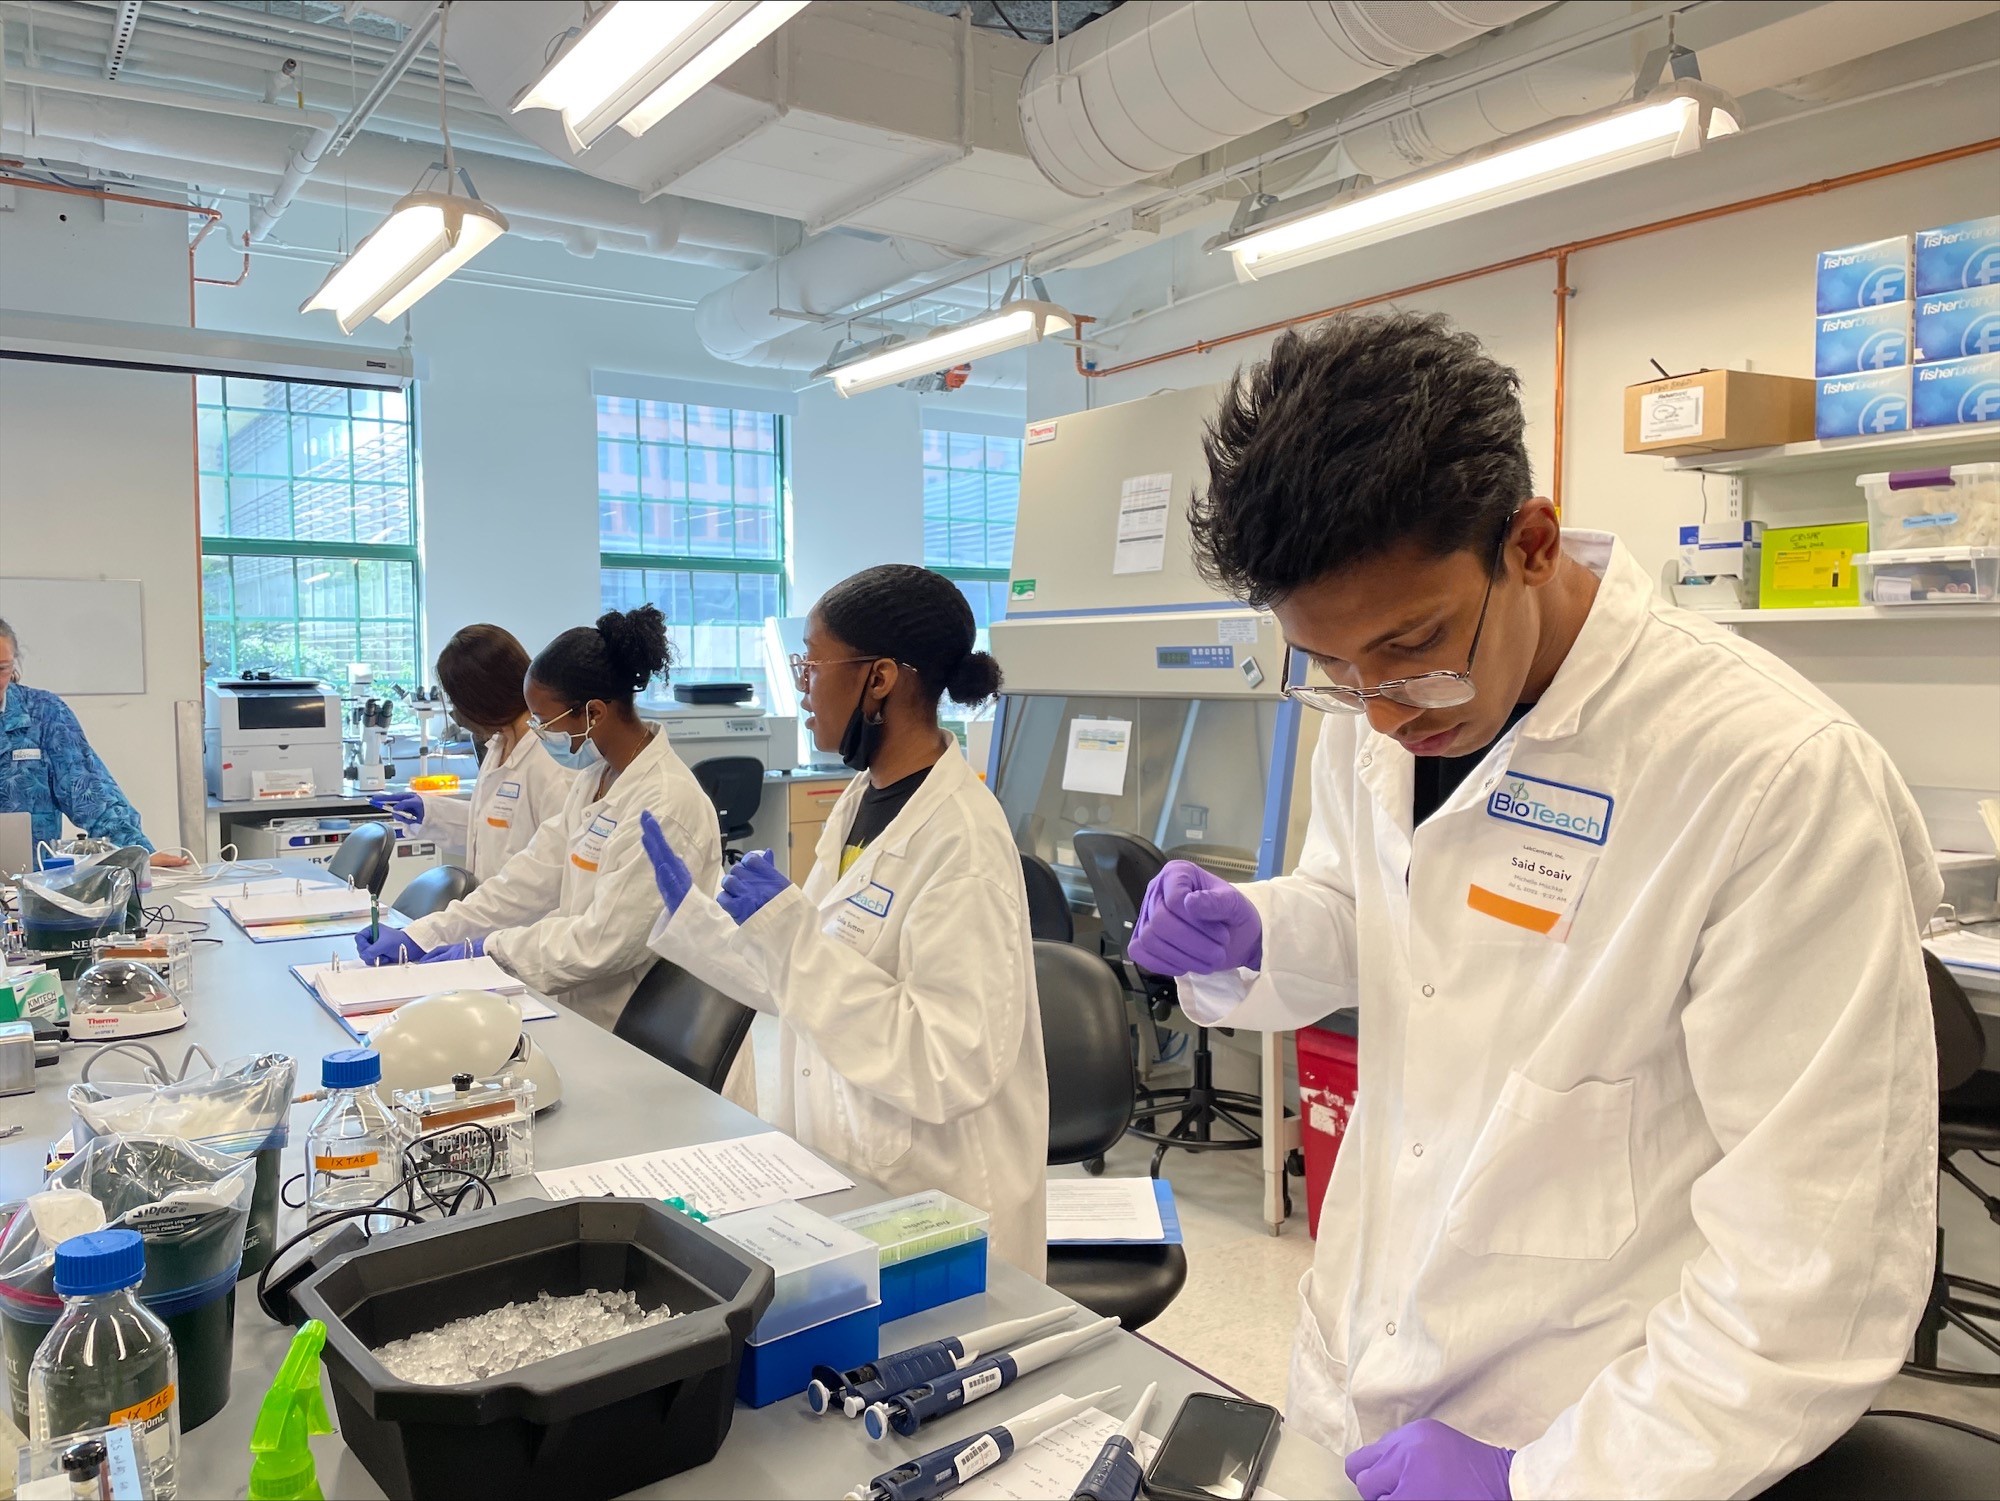 The LEAH Project and partners aim to increase diversity in STEM fields with launch of the STEM Exploration Internship